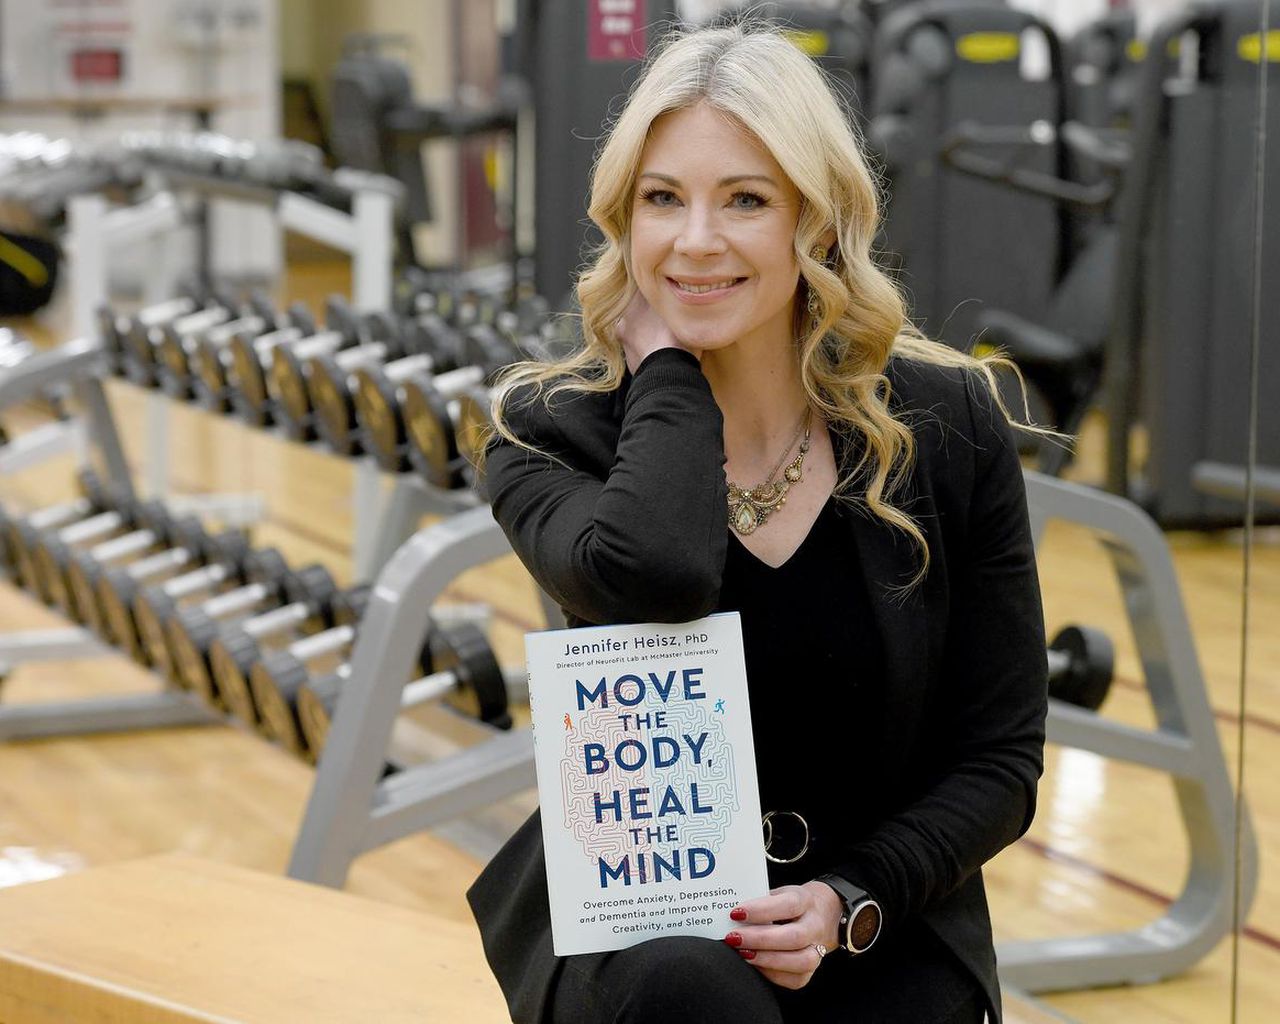 Dr. Jennifer Heisz with book in front of gym equipment